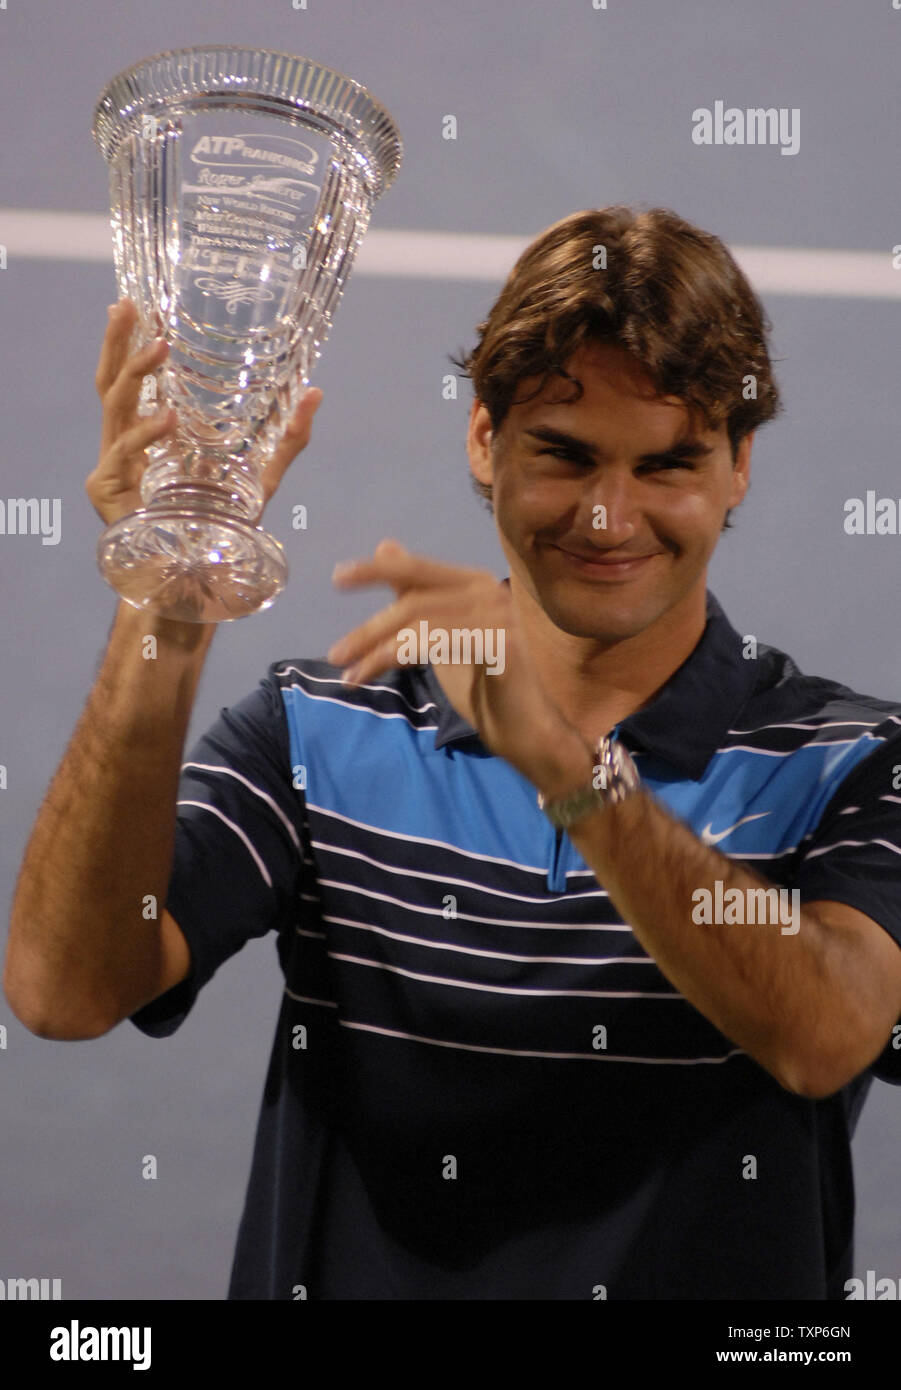 The world's number one tennis player, Roger Federer, receives a trophy from  the Association of Tennis Professionals and Dubai Duty Free celebrating his  161st consecutive week as the ATP number one ranked